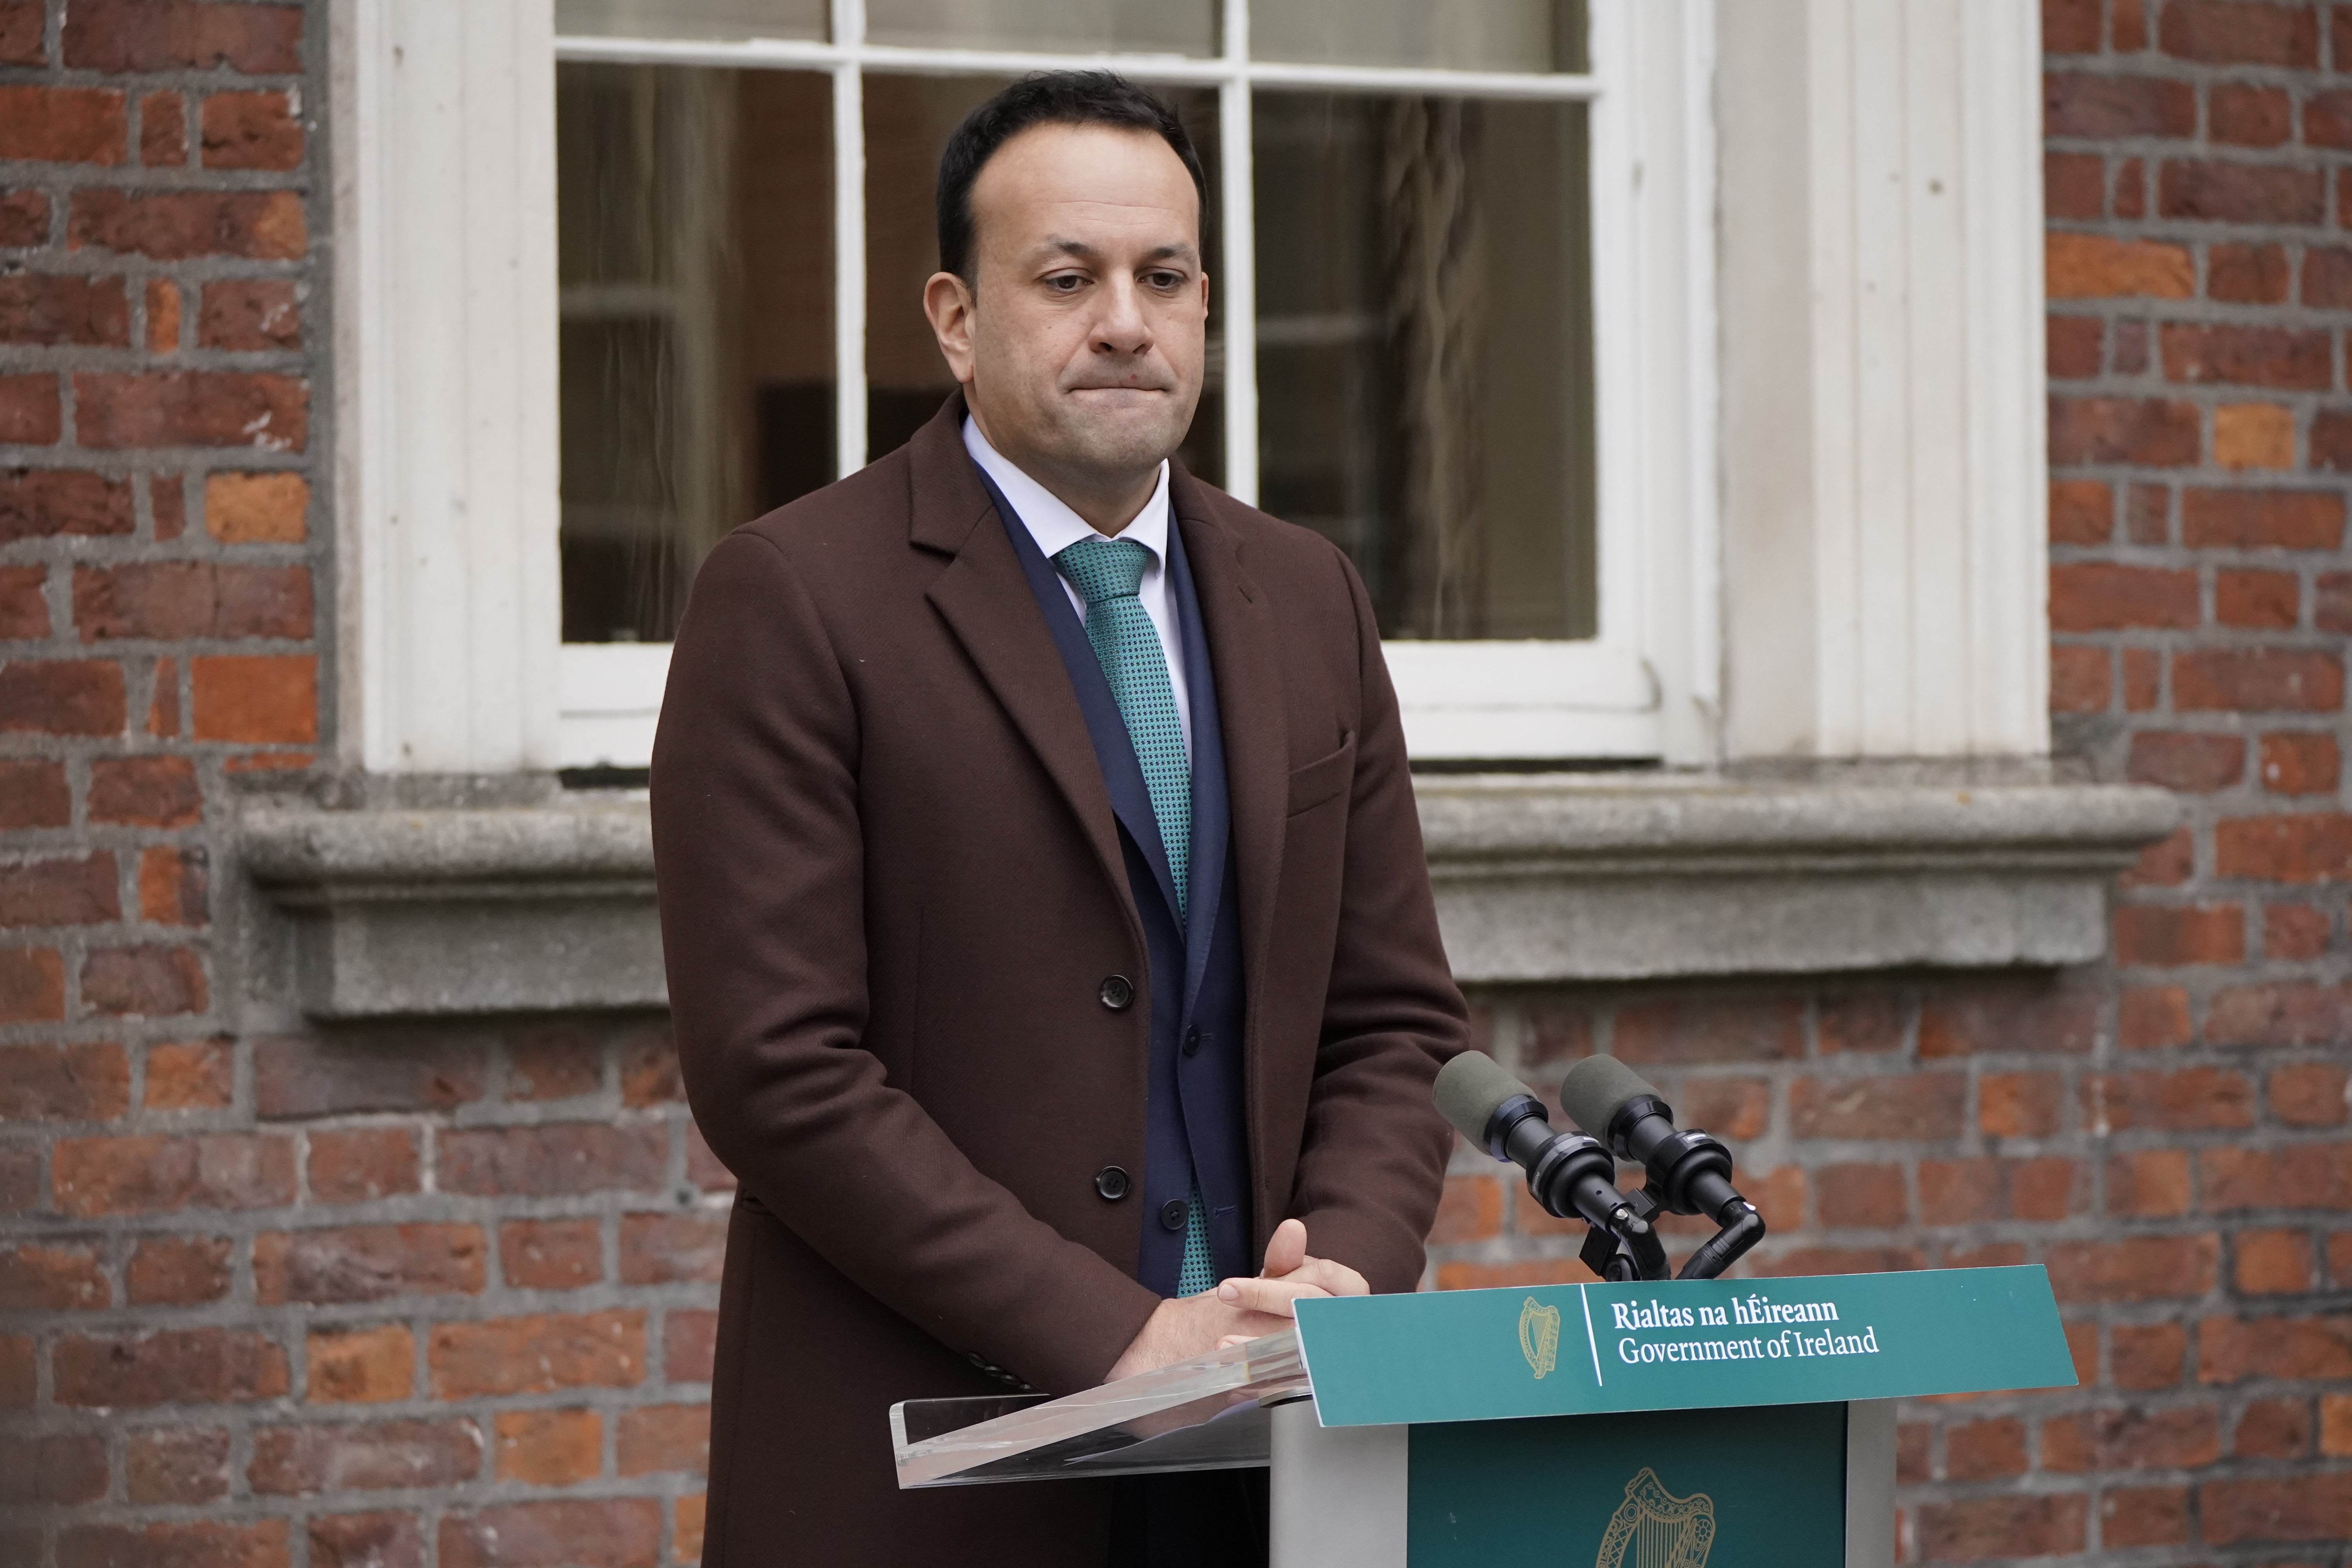 Tanaiste Leo Varadkar speaking to the media after a Cabinet meeting at Dublin Castle. Picture date: Tuesday January 25, 2022.